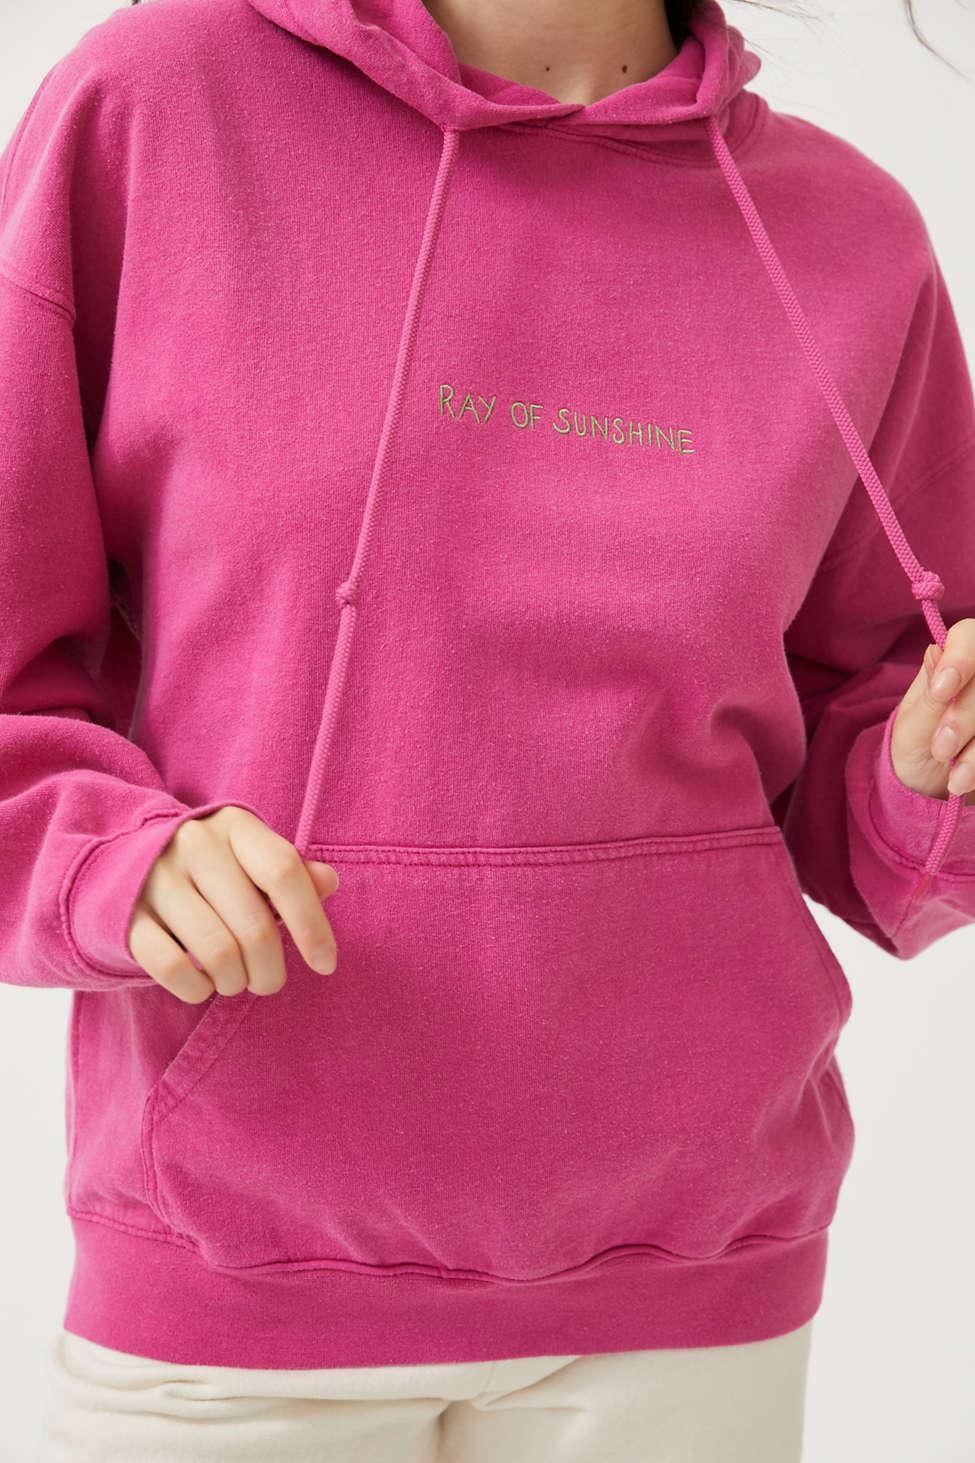 Urban Outfitters Ray Of Sunshine Hoodie Sweatshirt in Pink | Lyst